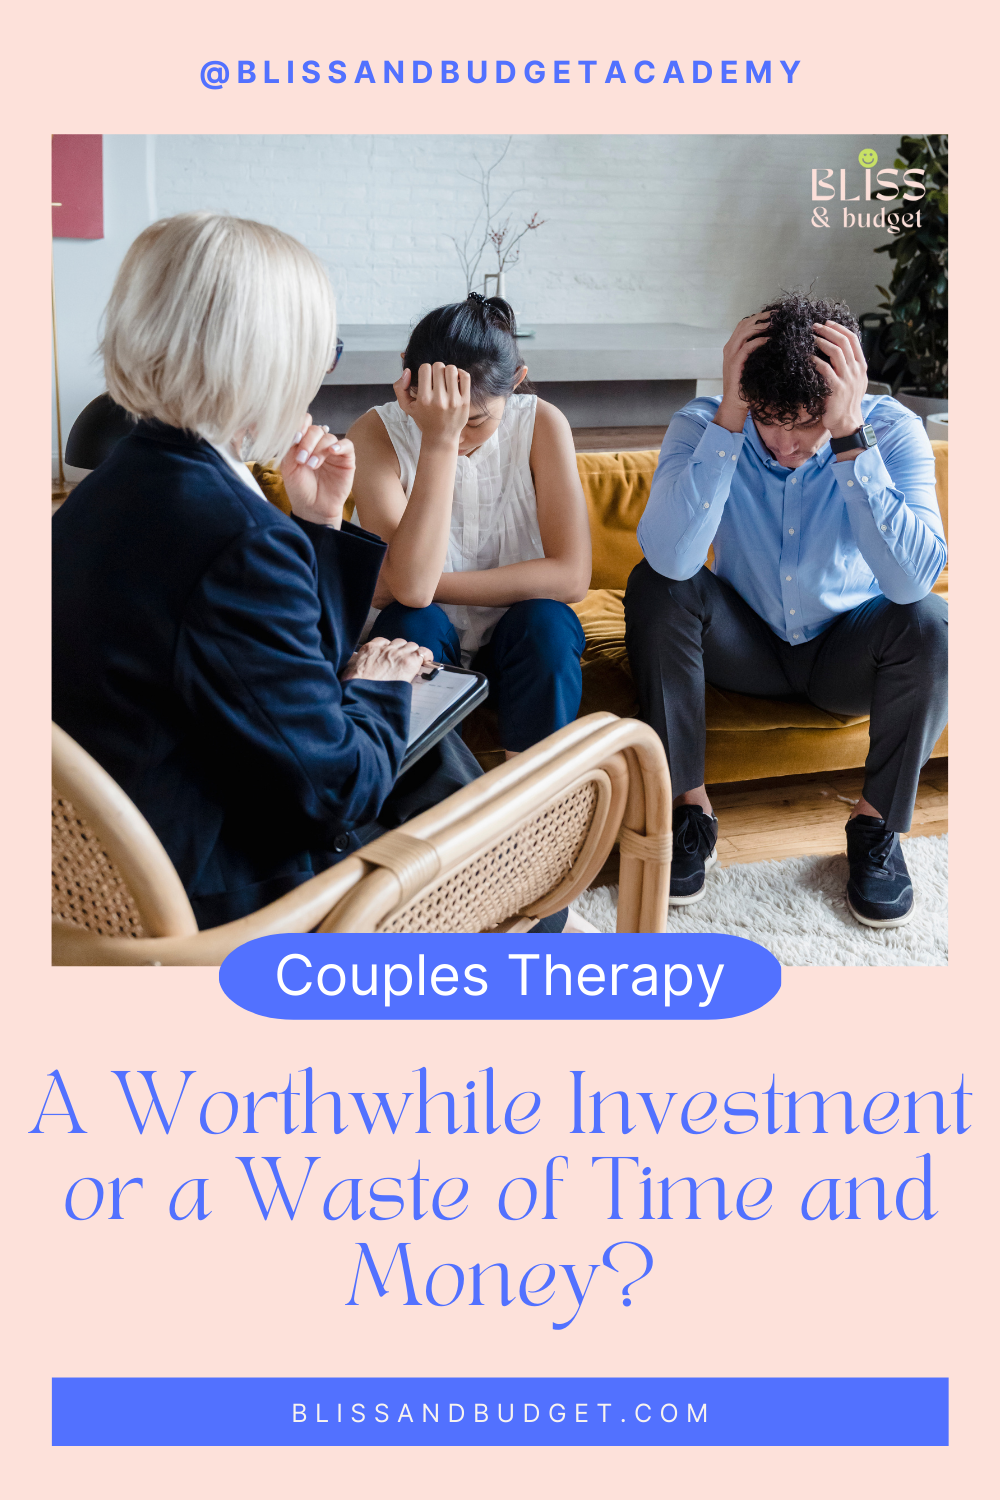 Couples Therapy: A Worthwhile Investment or a Waste of Time and Money?